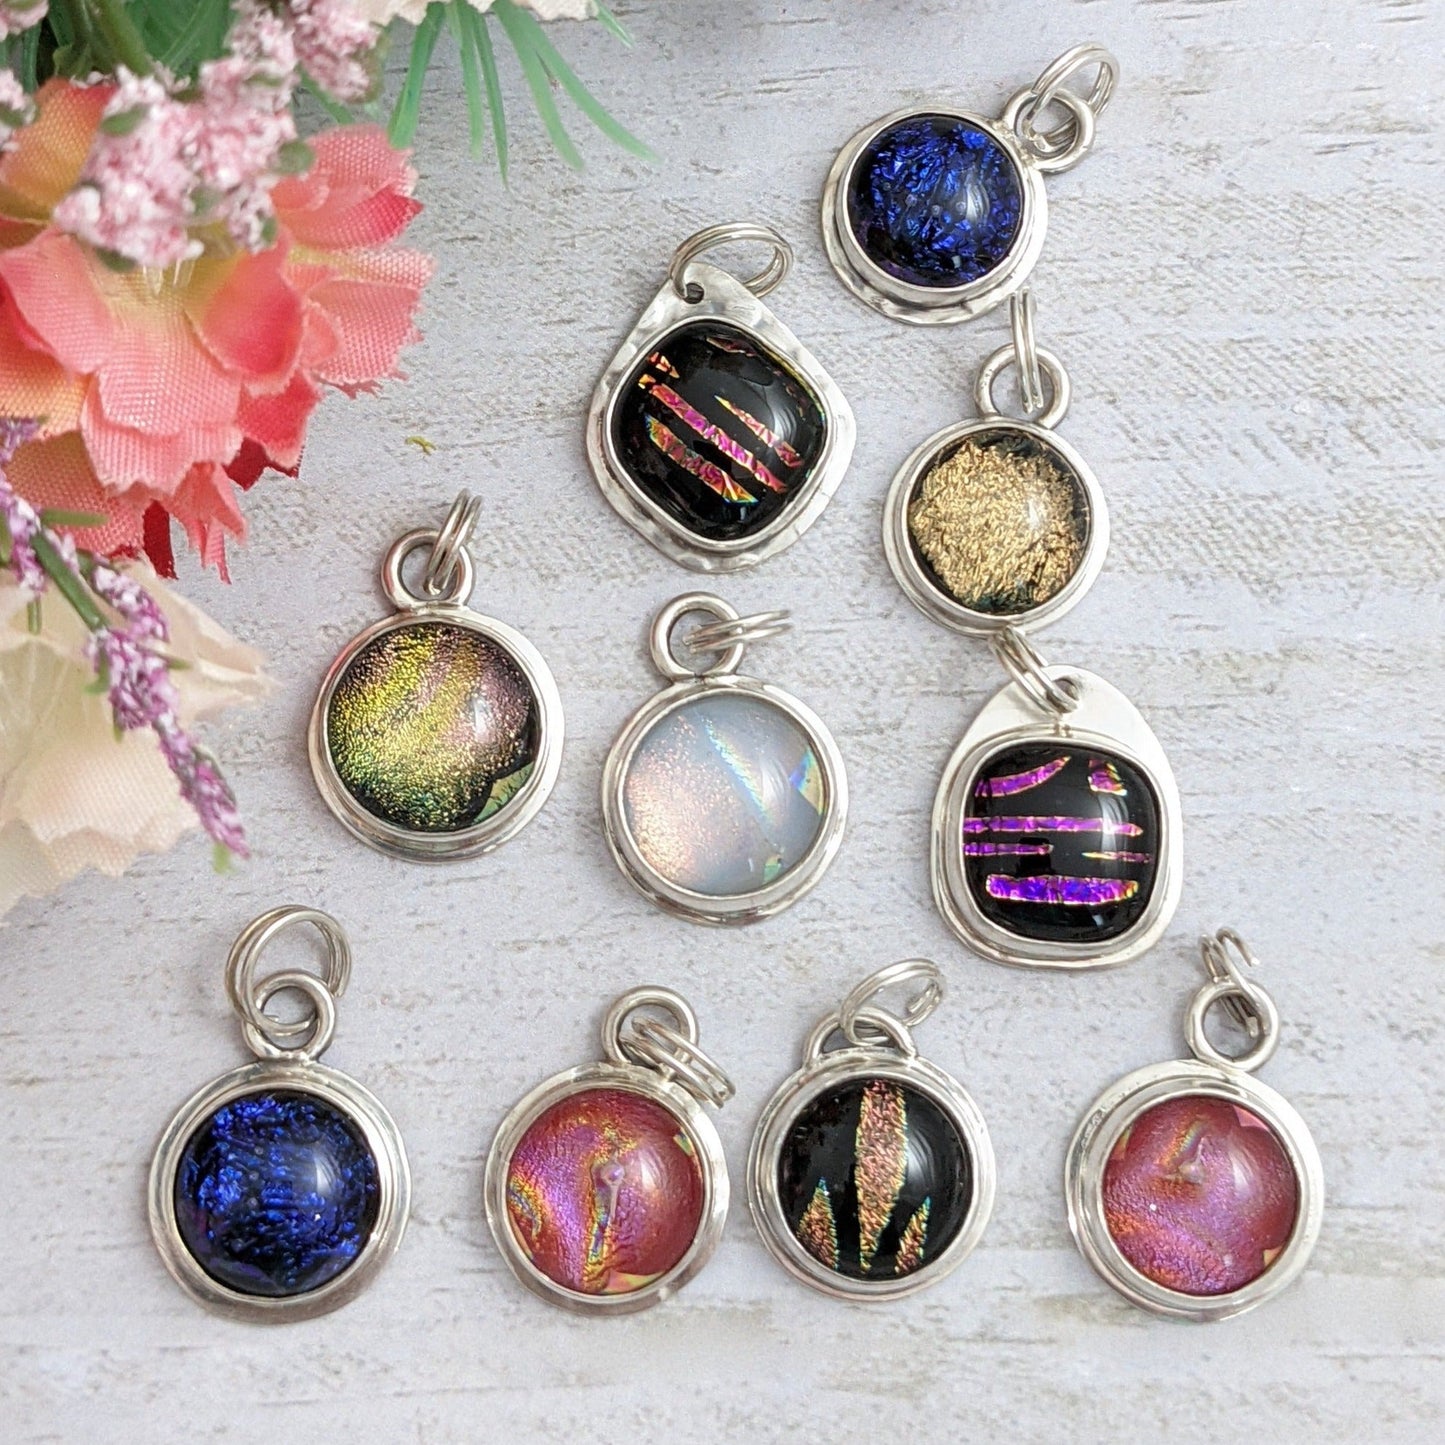 Jewelry charms. Dichroic glass round and square shapes in different colors set in  sterling silver with split rings added to hang from bracelet or necklace